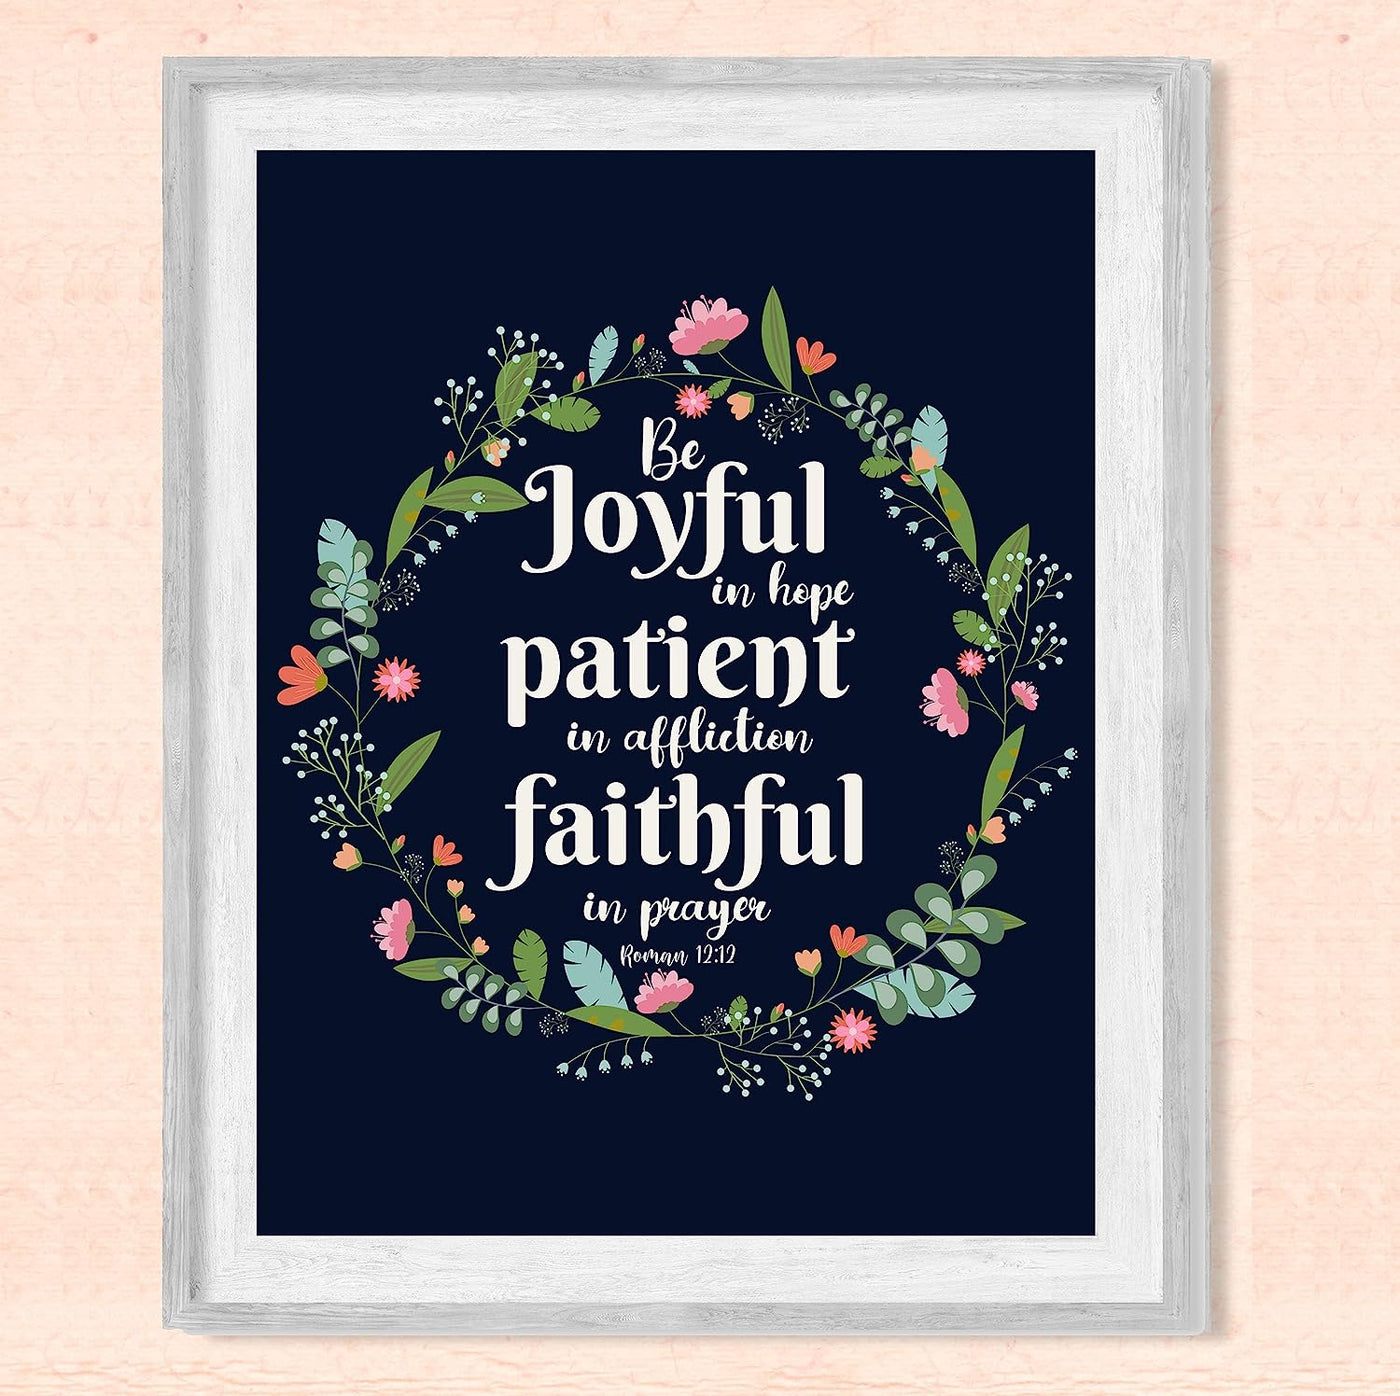 Be Joyful In Hope-Patient-Faithful-Bible Verse Wall Art -8 x 10" Floral Typographic Poster Print-Ready to Frame. Inspirational Christian Decor for Home-Office-Church & Religious Gifts! Romans 12:12